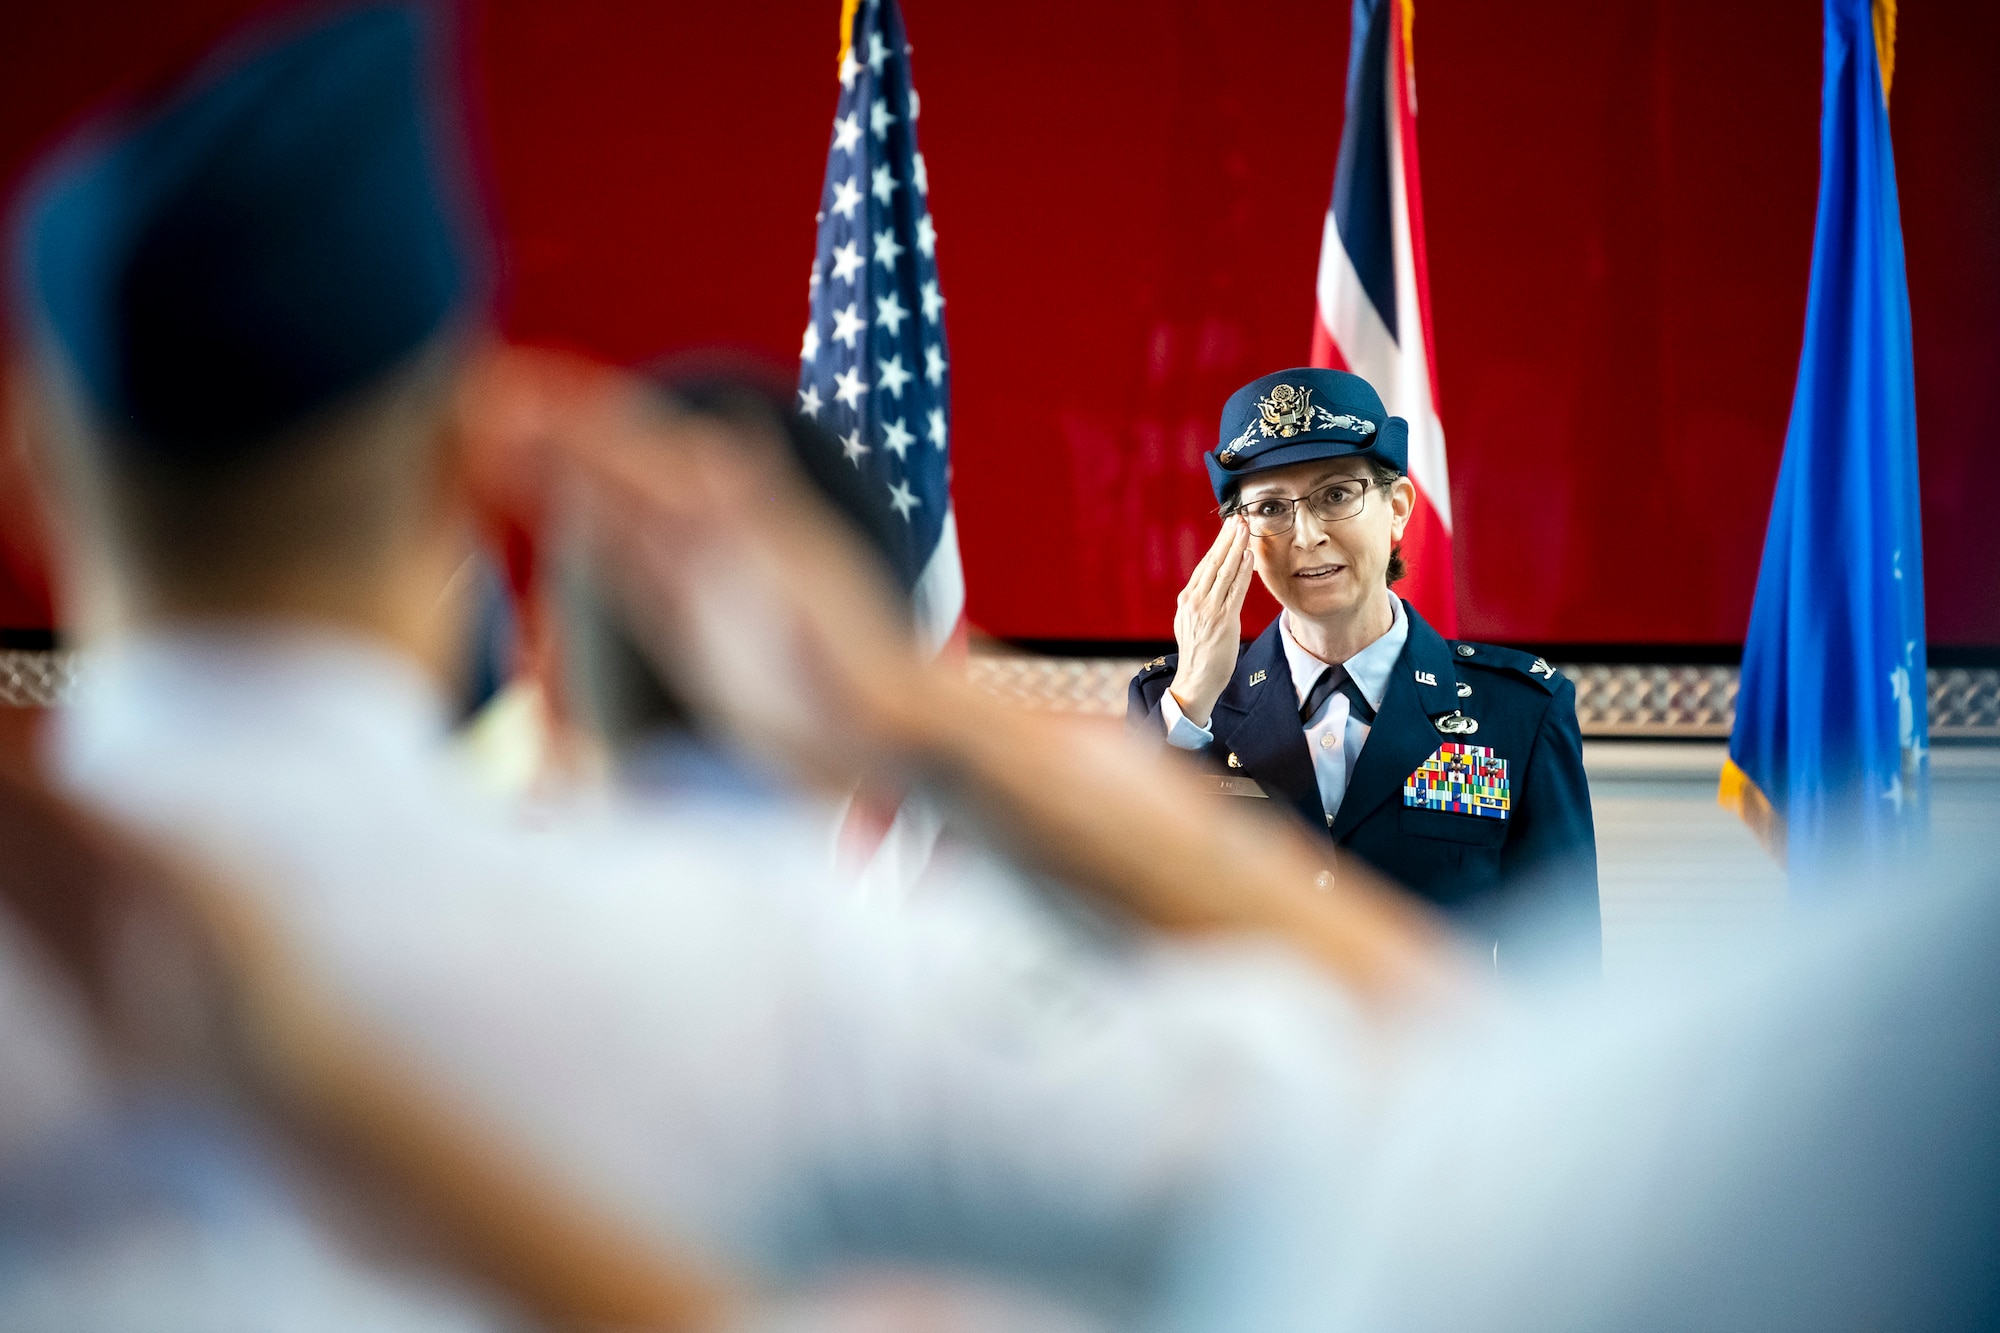 U.S. Air Force Col. Valarie Long, 423d Air Base Group incoming commander, renders her first salute as commander during a change of command ceremony at RAF Alconbury, England, July 25, 2022. Prior to assuming command, Long served as the Director of Information Warfare at the 603d Air Operations Center, Ramstein AB, Germany. (U.S. Air Force photo by Staff Sgt. Eugene Oliver)